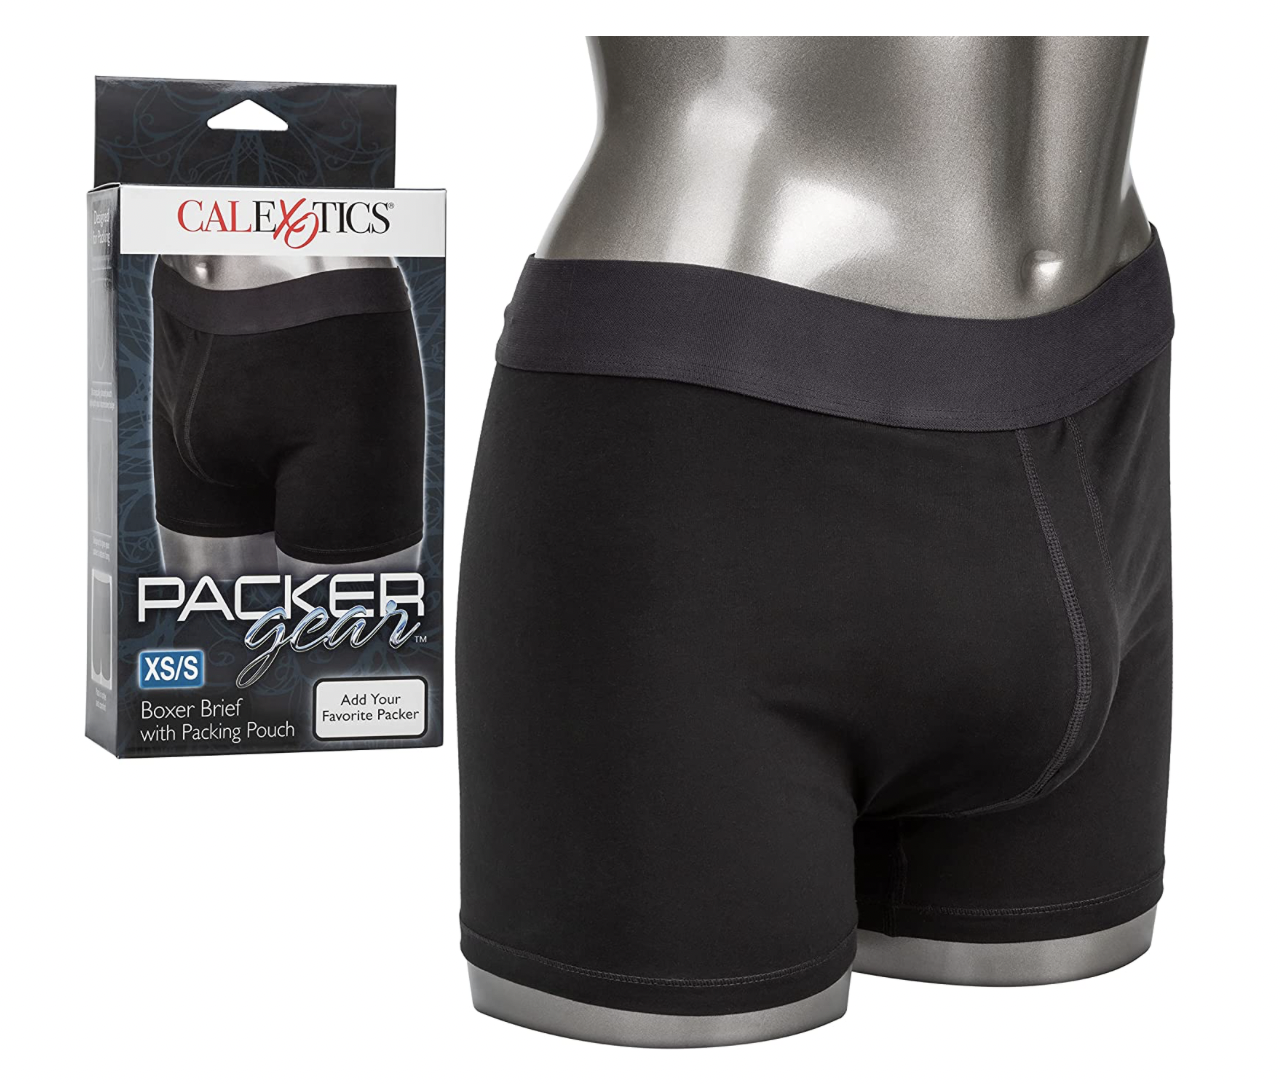 Packer Gear - Boxer Brief with Packing Pouch